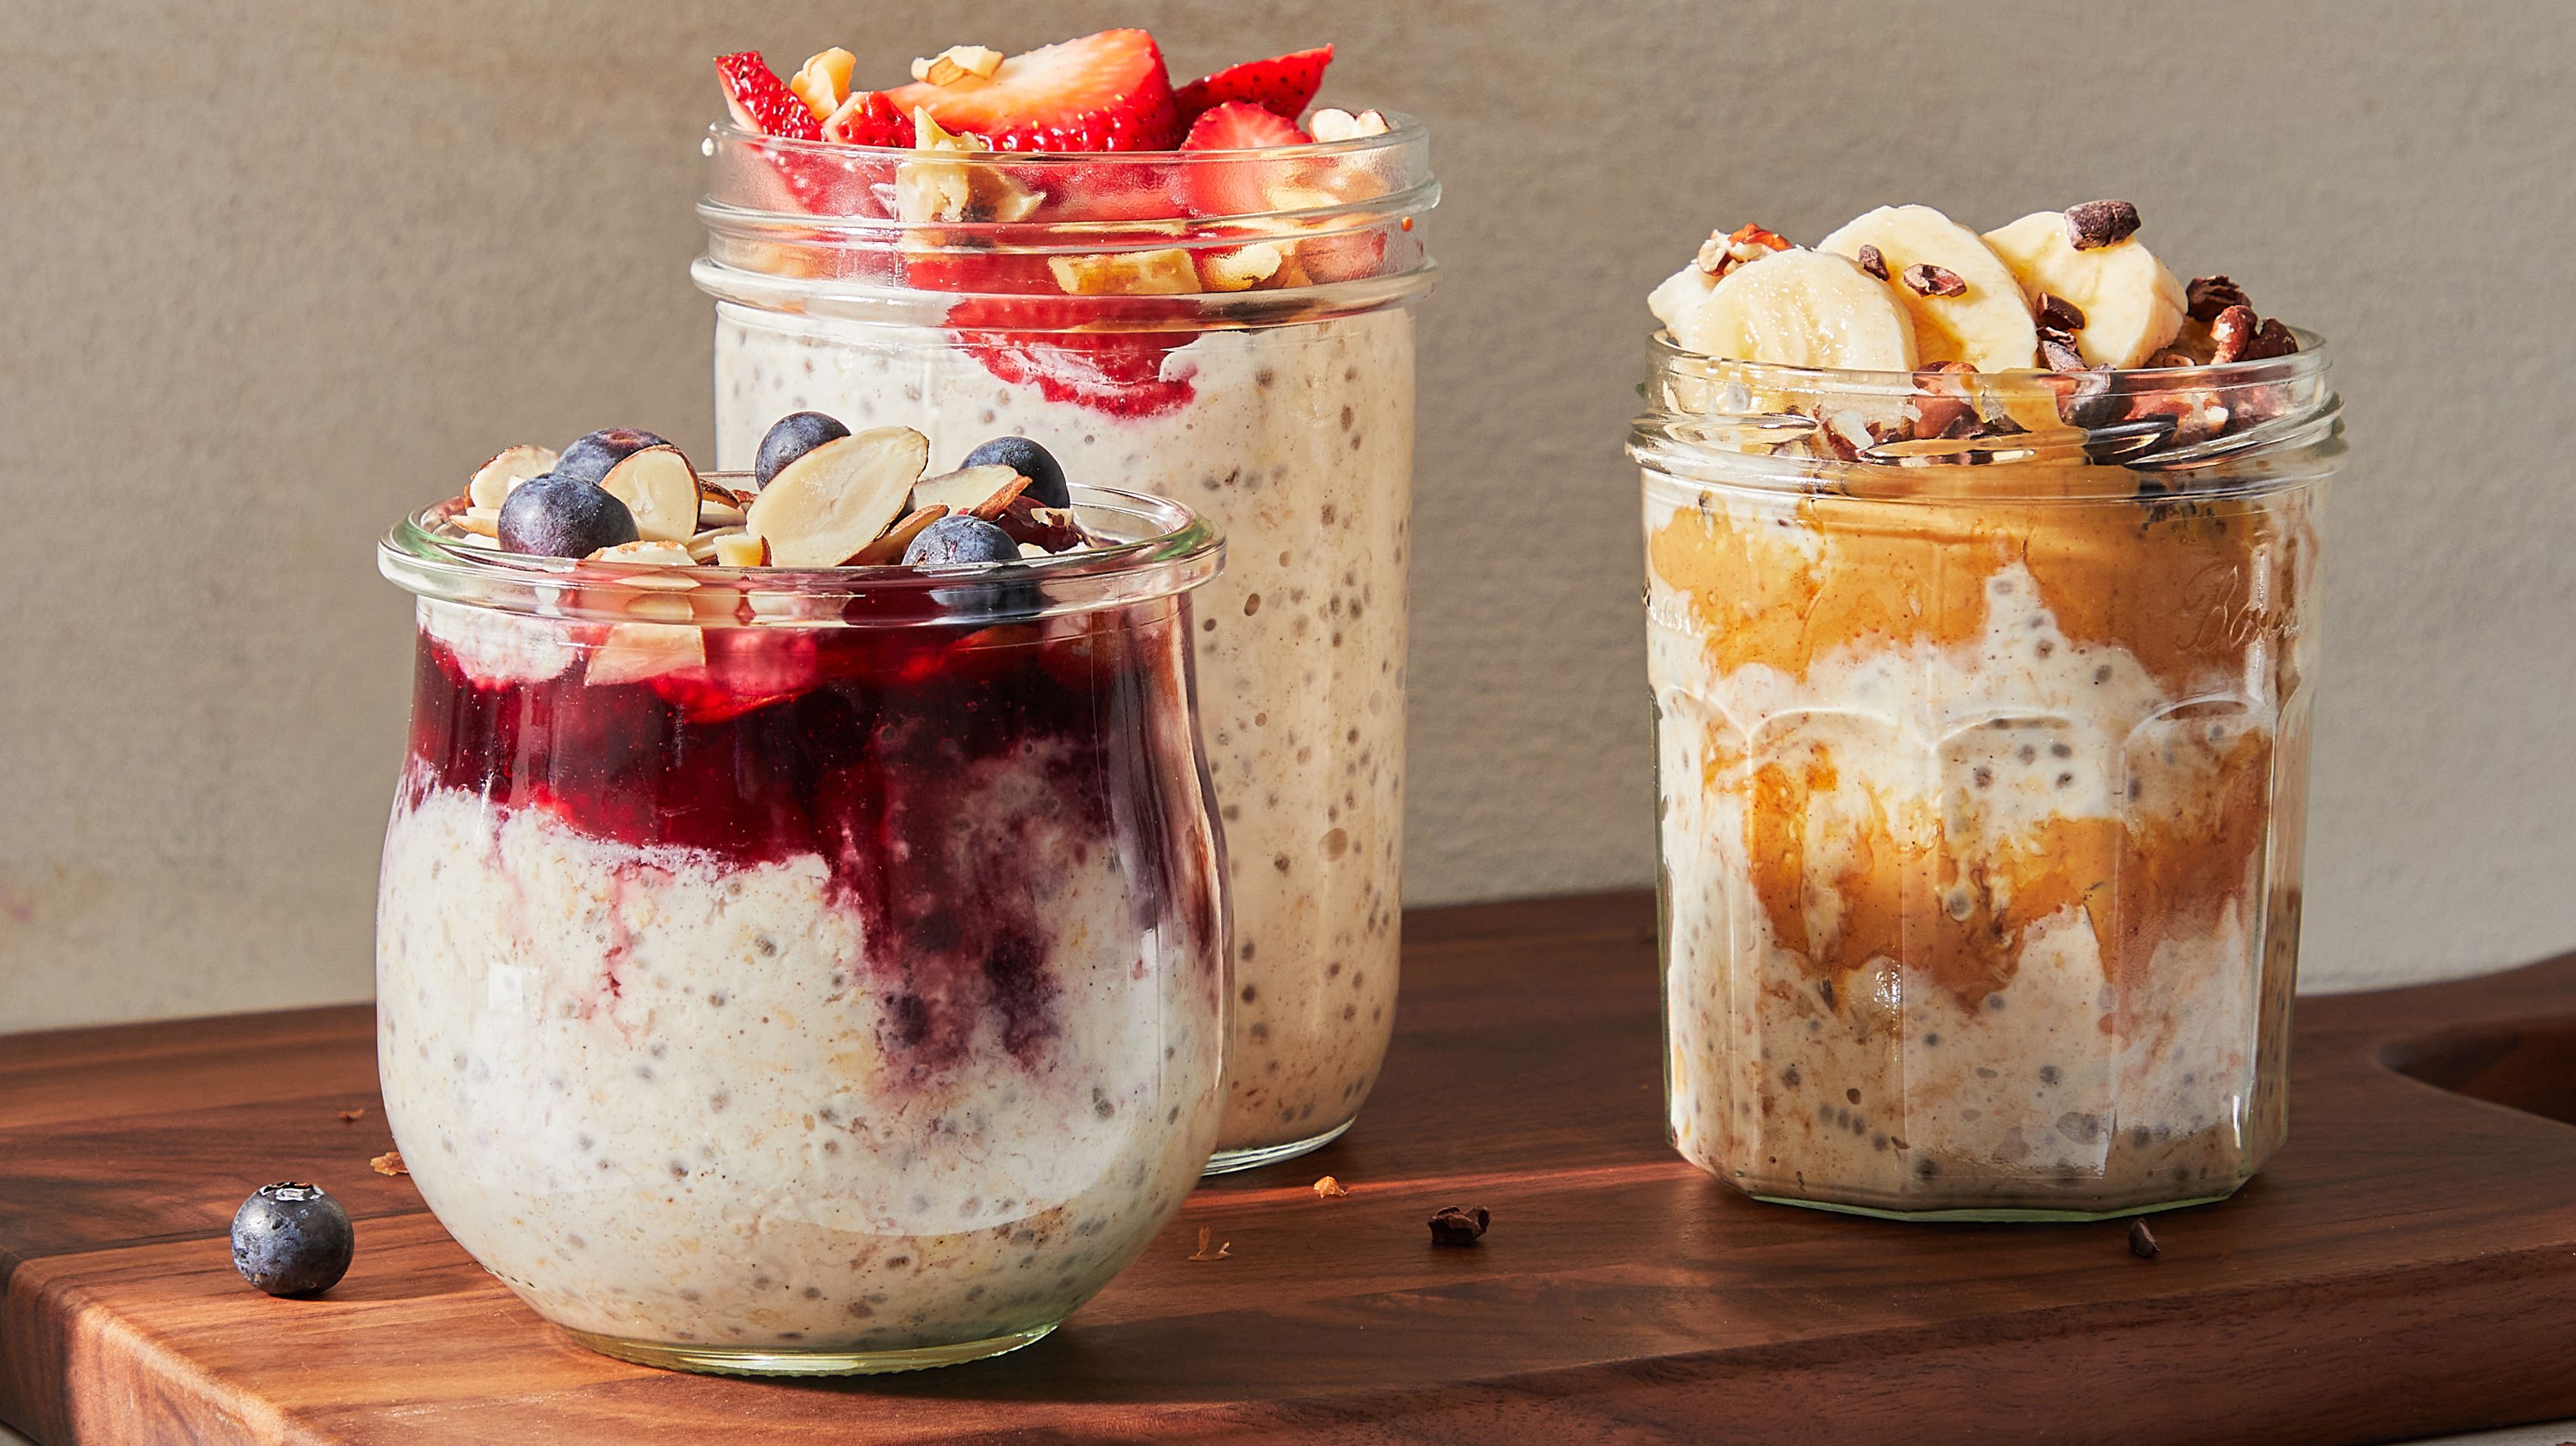 Overnight Oats Recipe - NYT Cooking